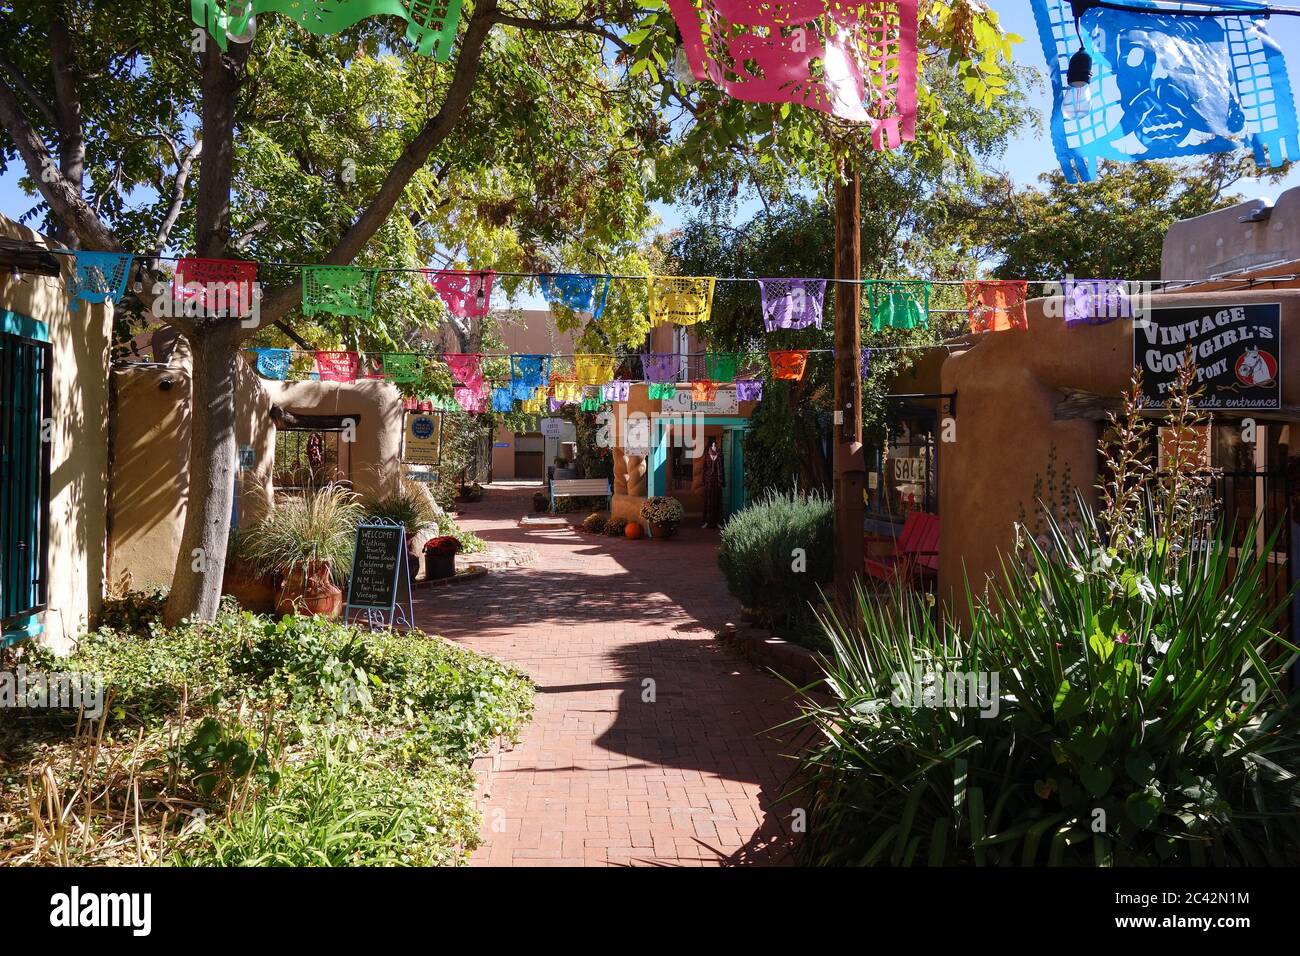 Passage with stores and galleries in Albuquerque, New Mexico Stock Photo